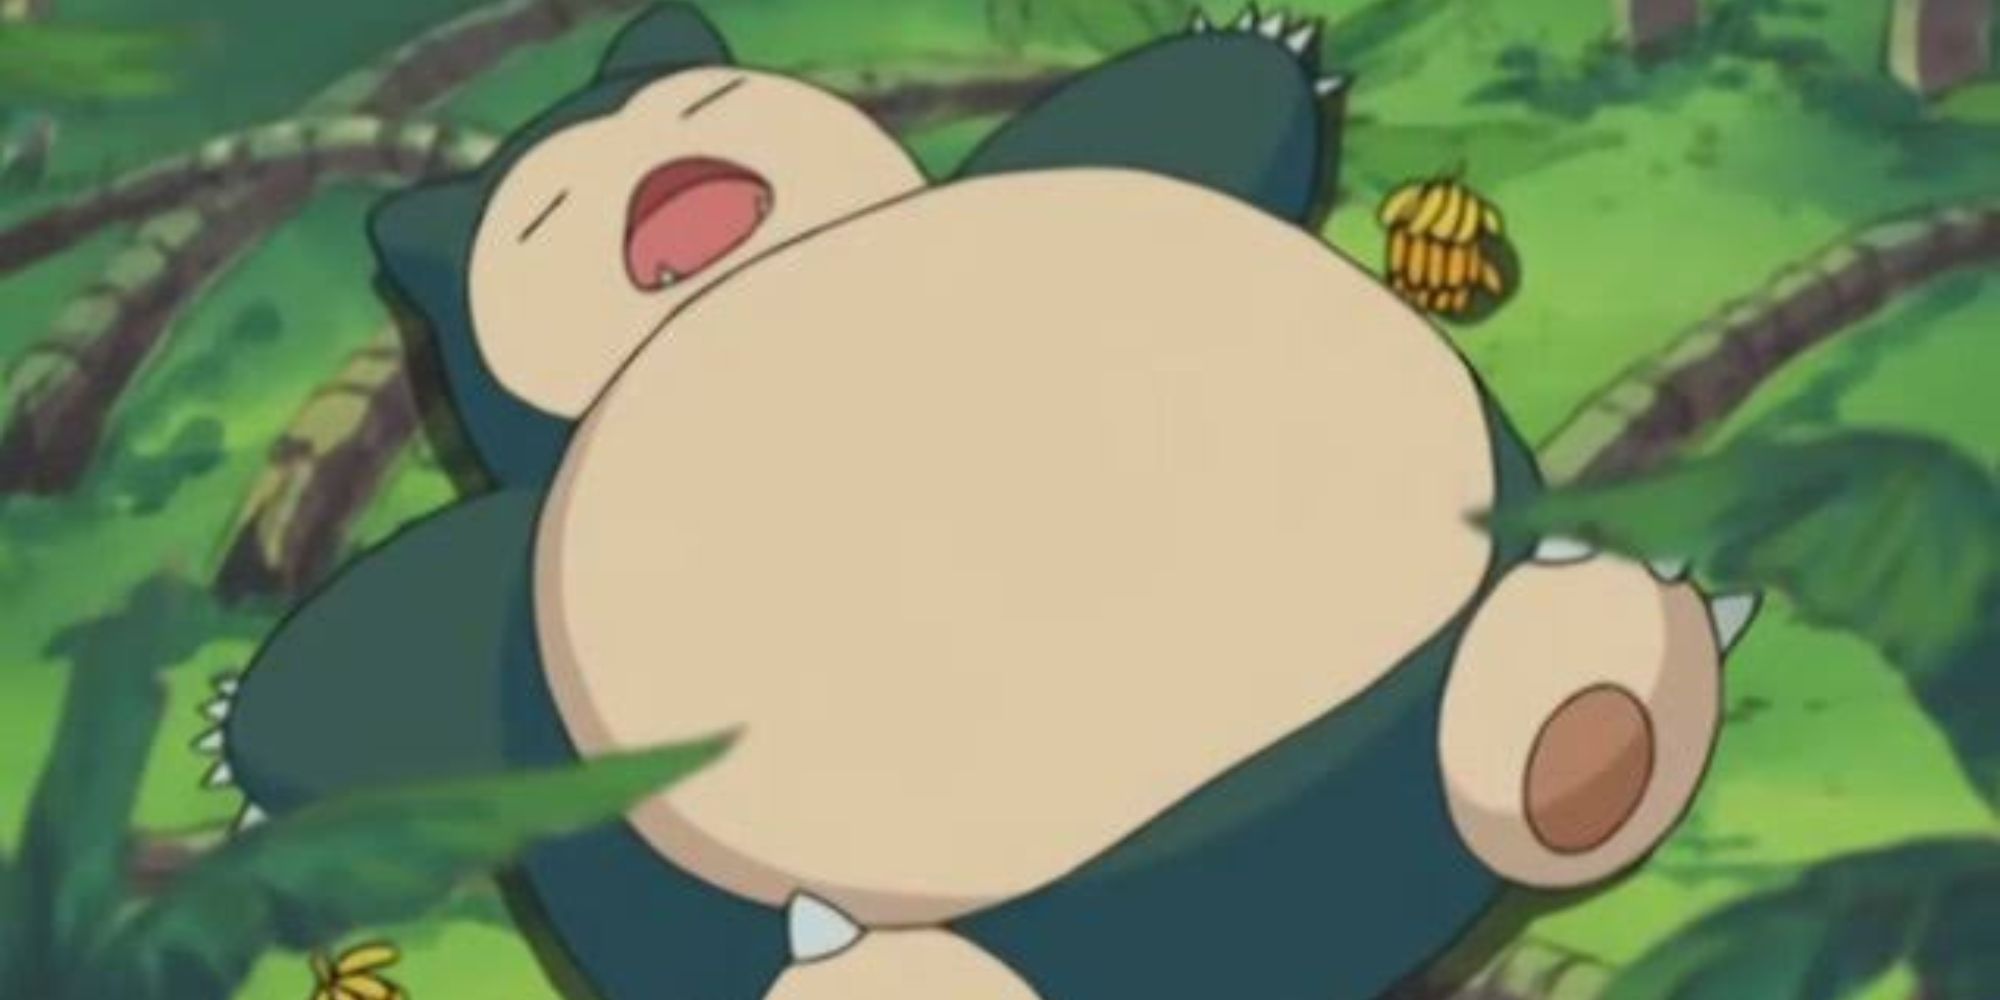 Snorlax is in a land of forests surrounded by food.